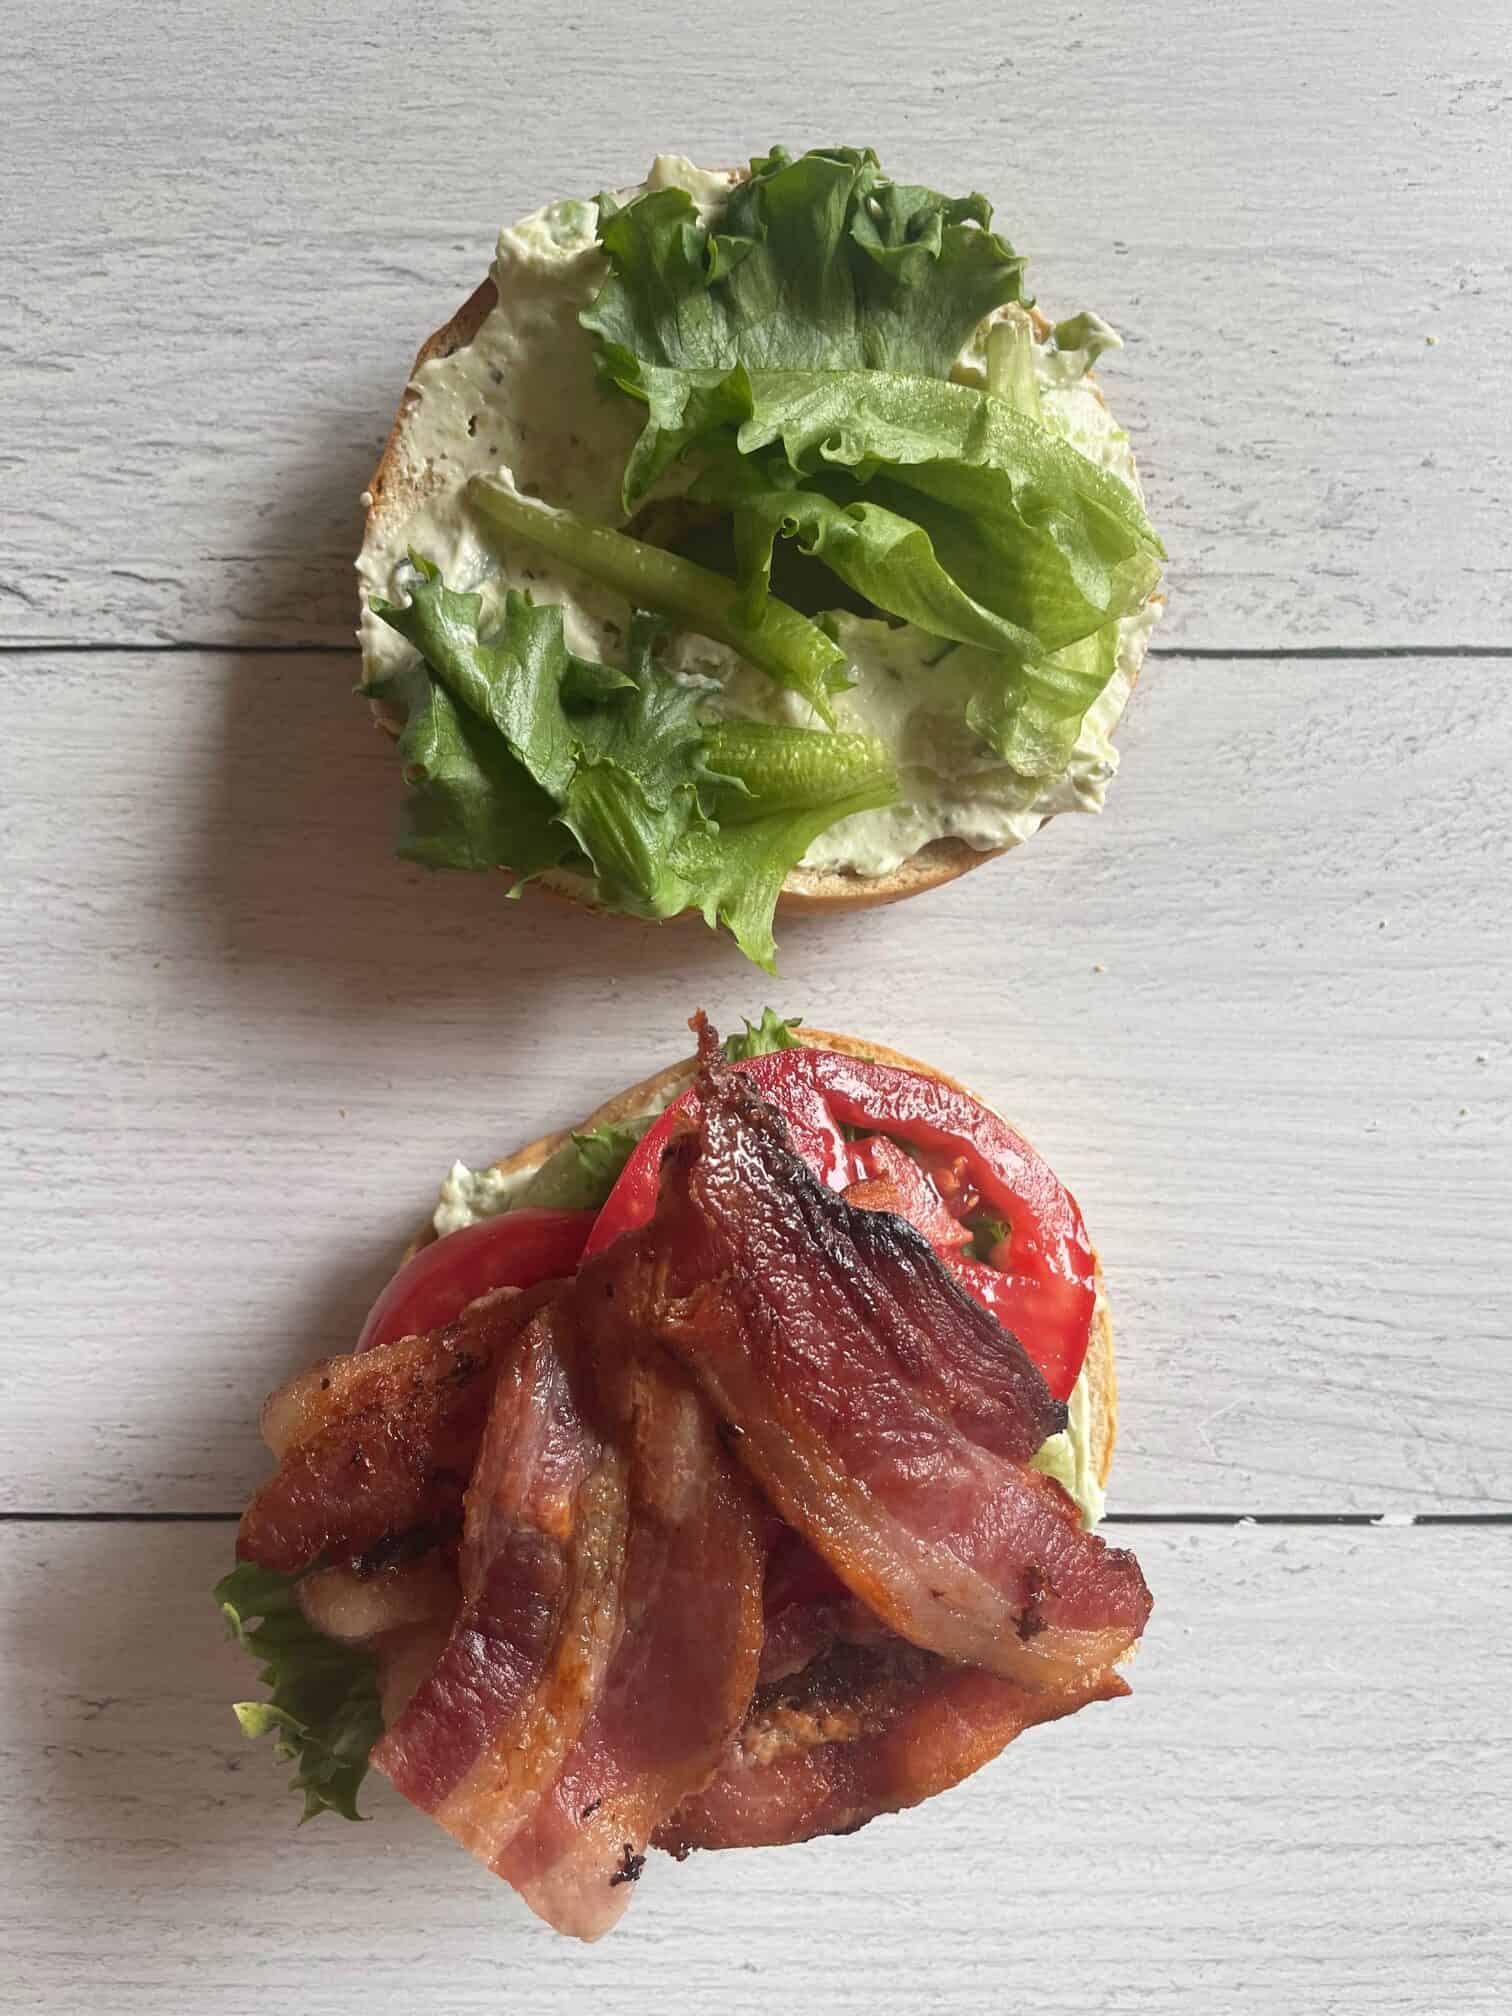 Bagel with bacon, lettuce, tomato and cream cheese spread.